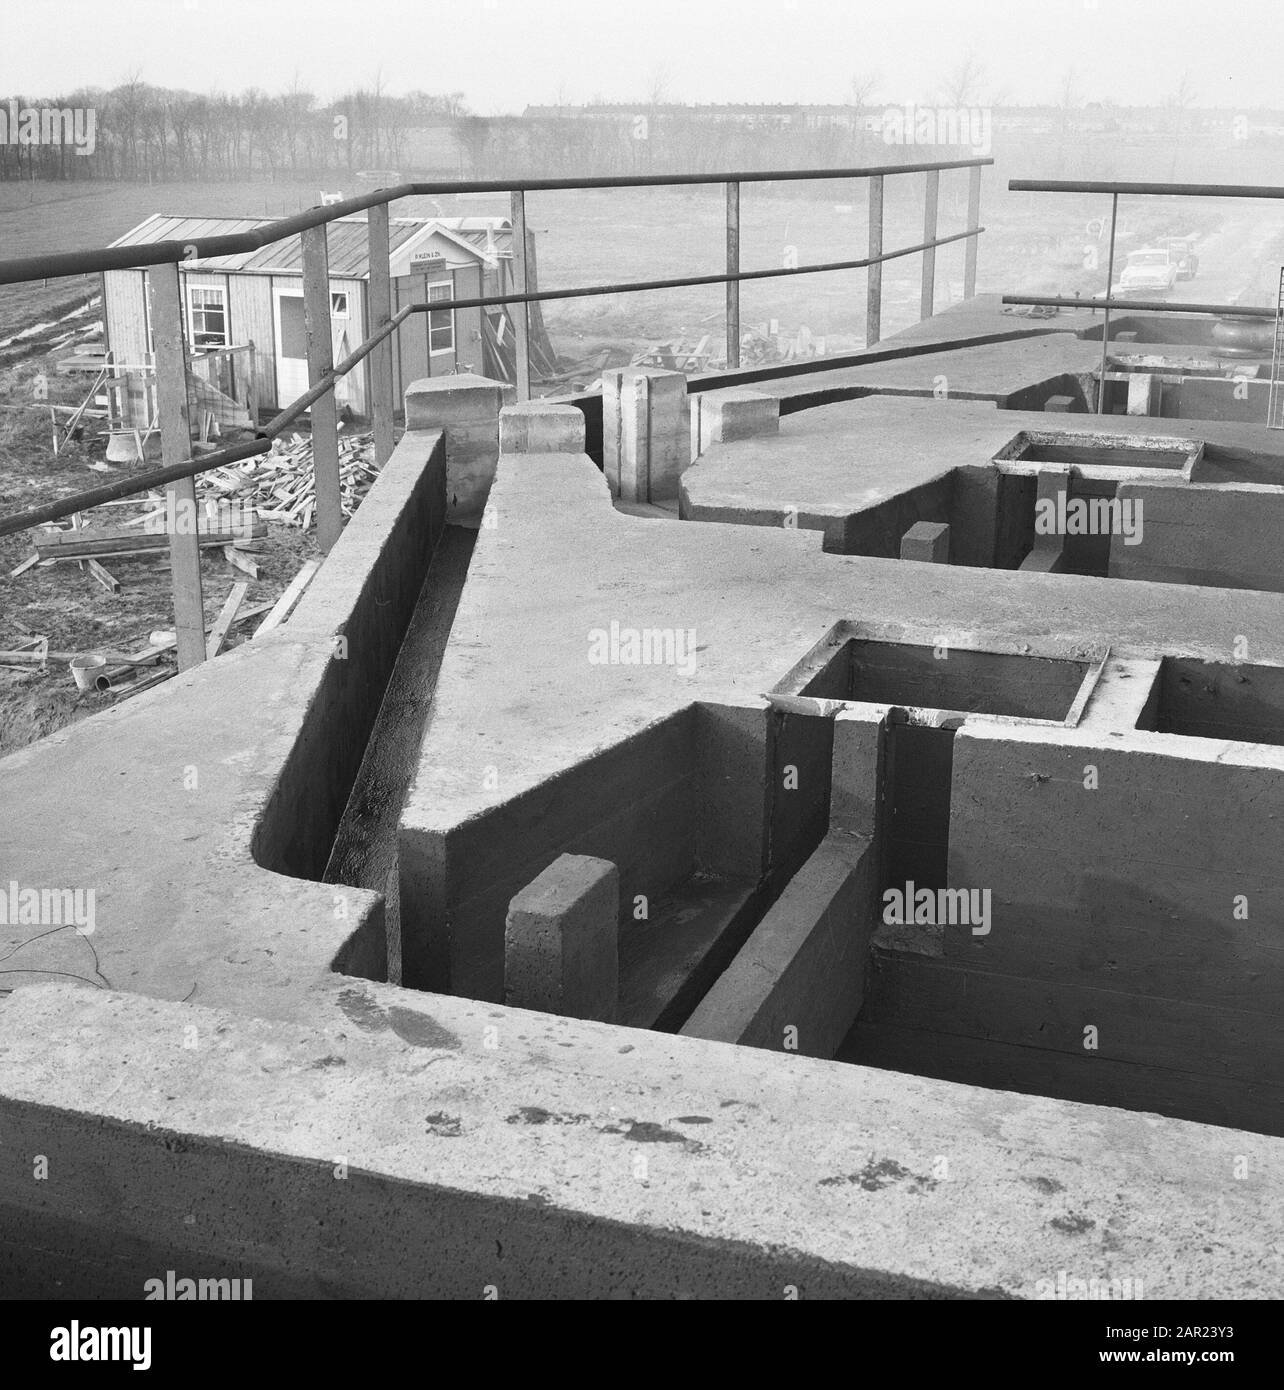 cleaning wastewater, treatment of urban waste, sewage treatment plants, moulds Date: 1965 Location: Den Oever Keywords: cleaning wastewater, sewage treatment plants, moulds, handling urban waste Stock Photo